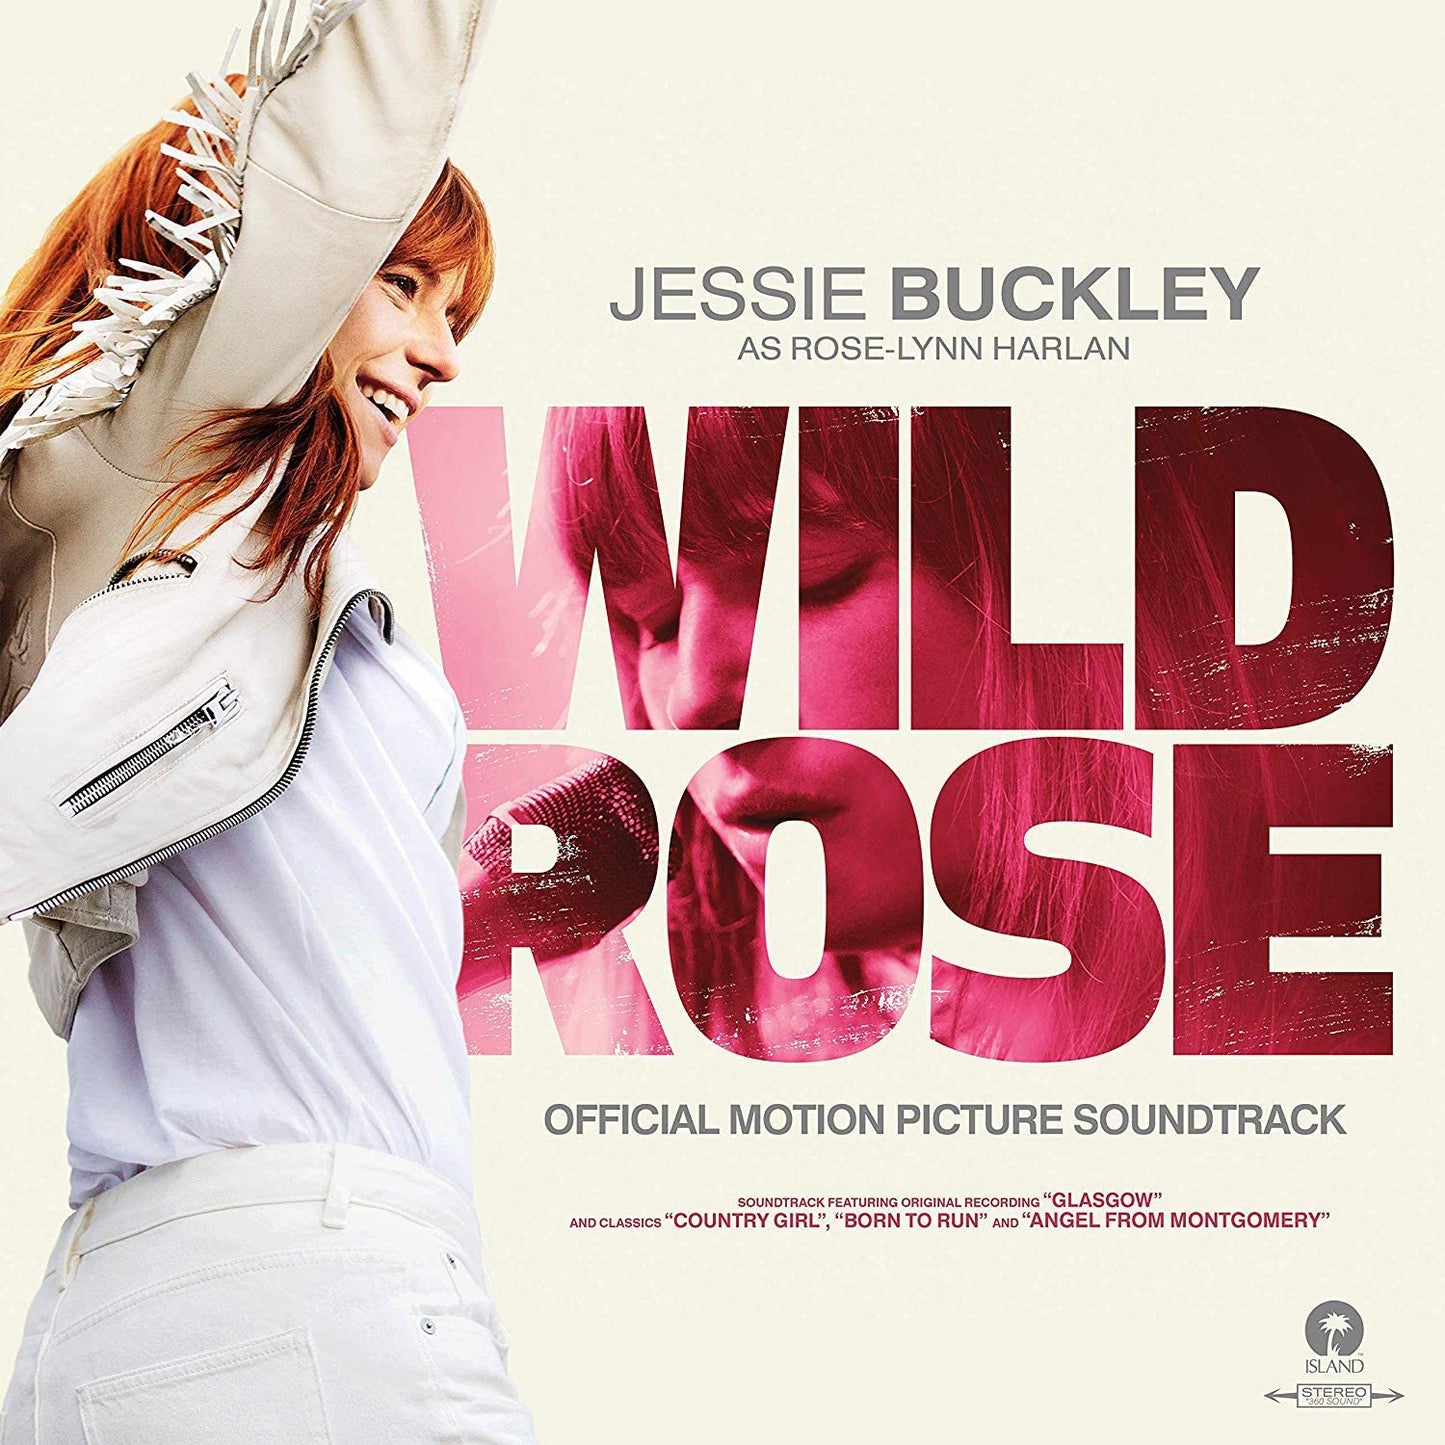 Original soundtrack on Vinyl to the musical drama film starring the Irish singer and actress Jessie Buckley, who performs every track on the album.